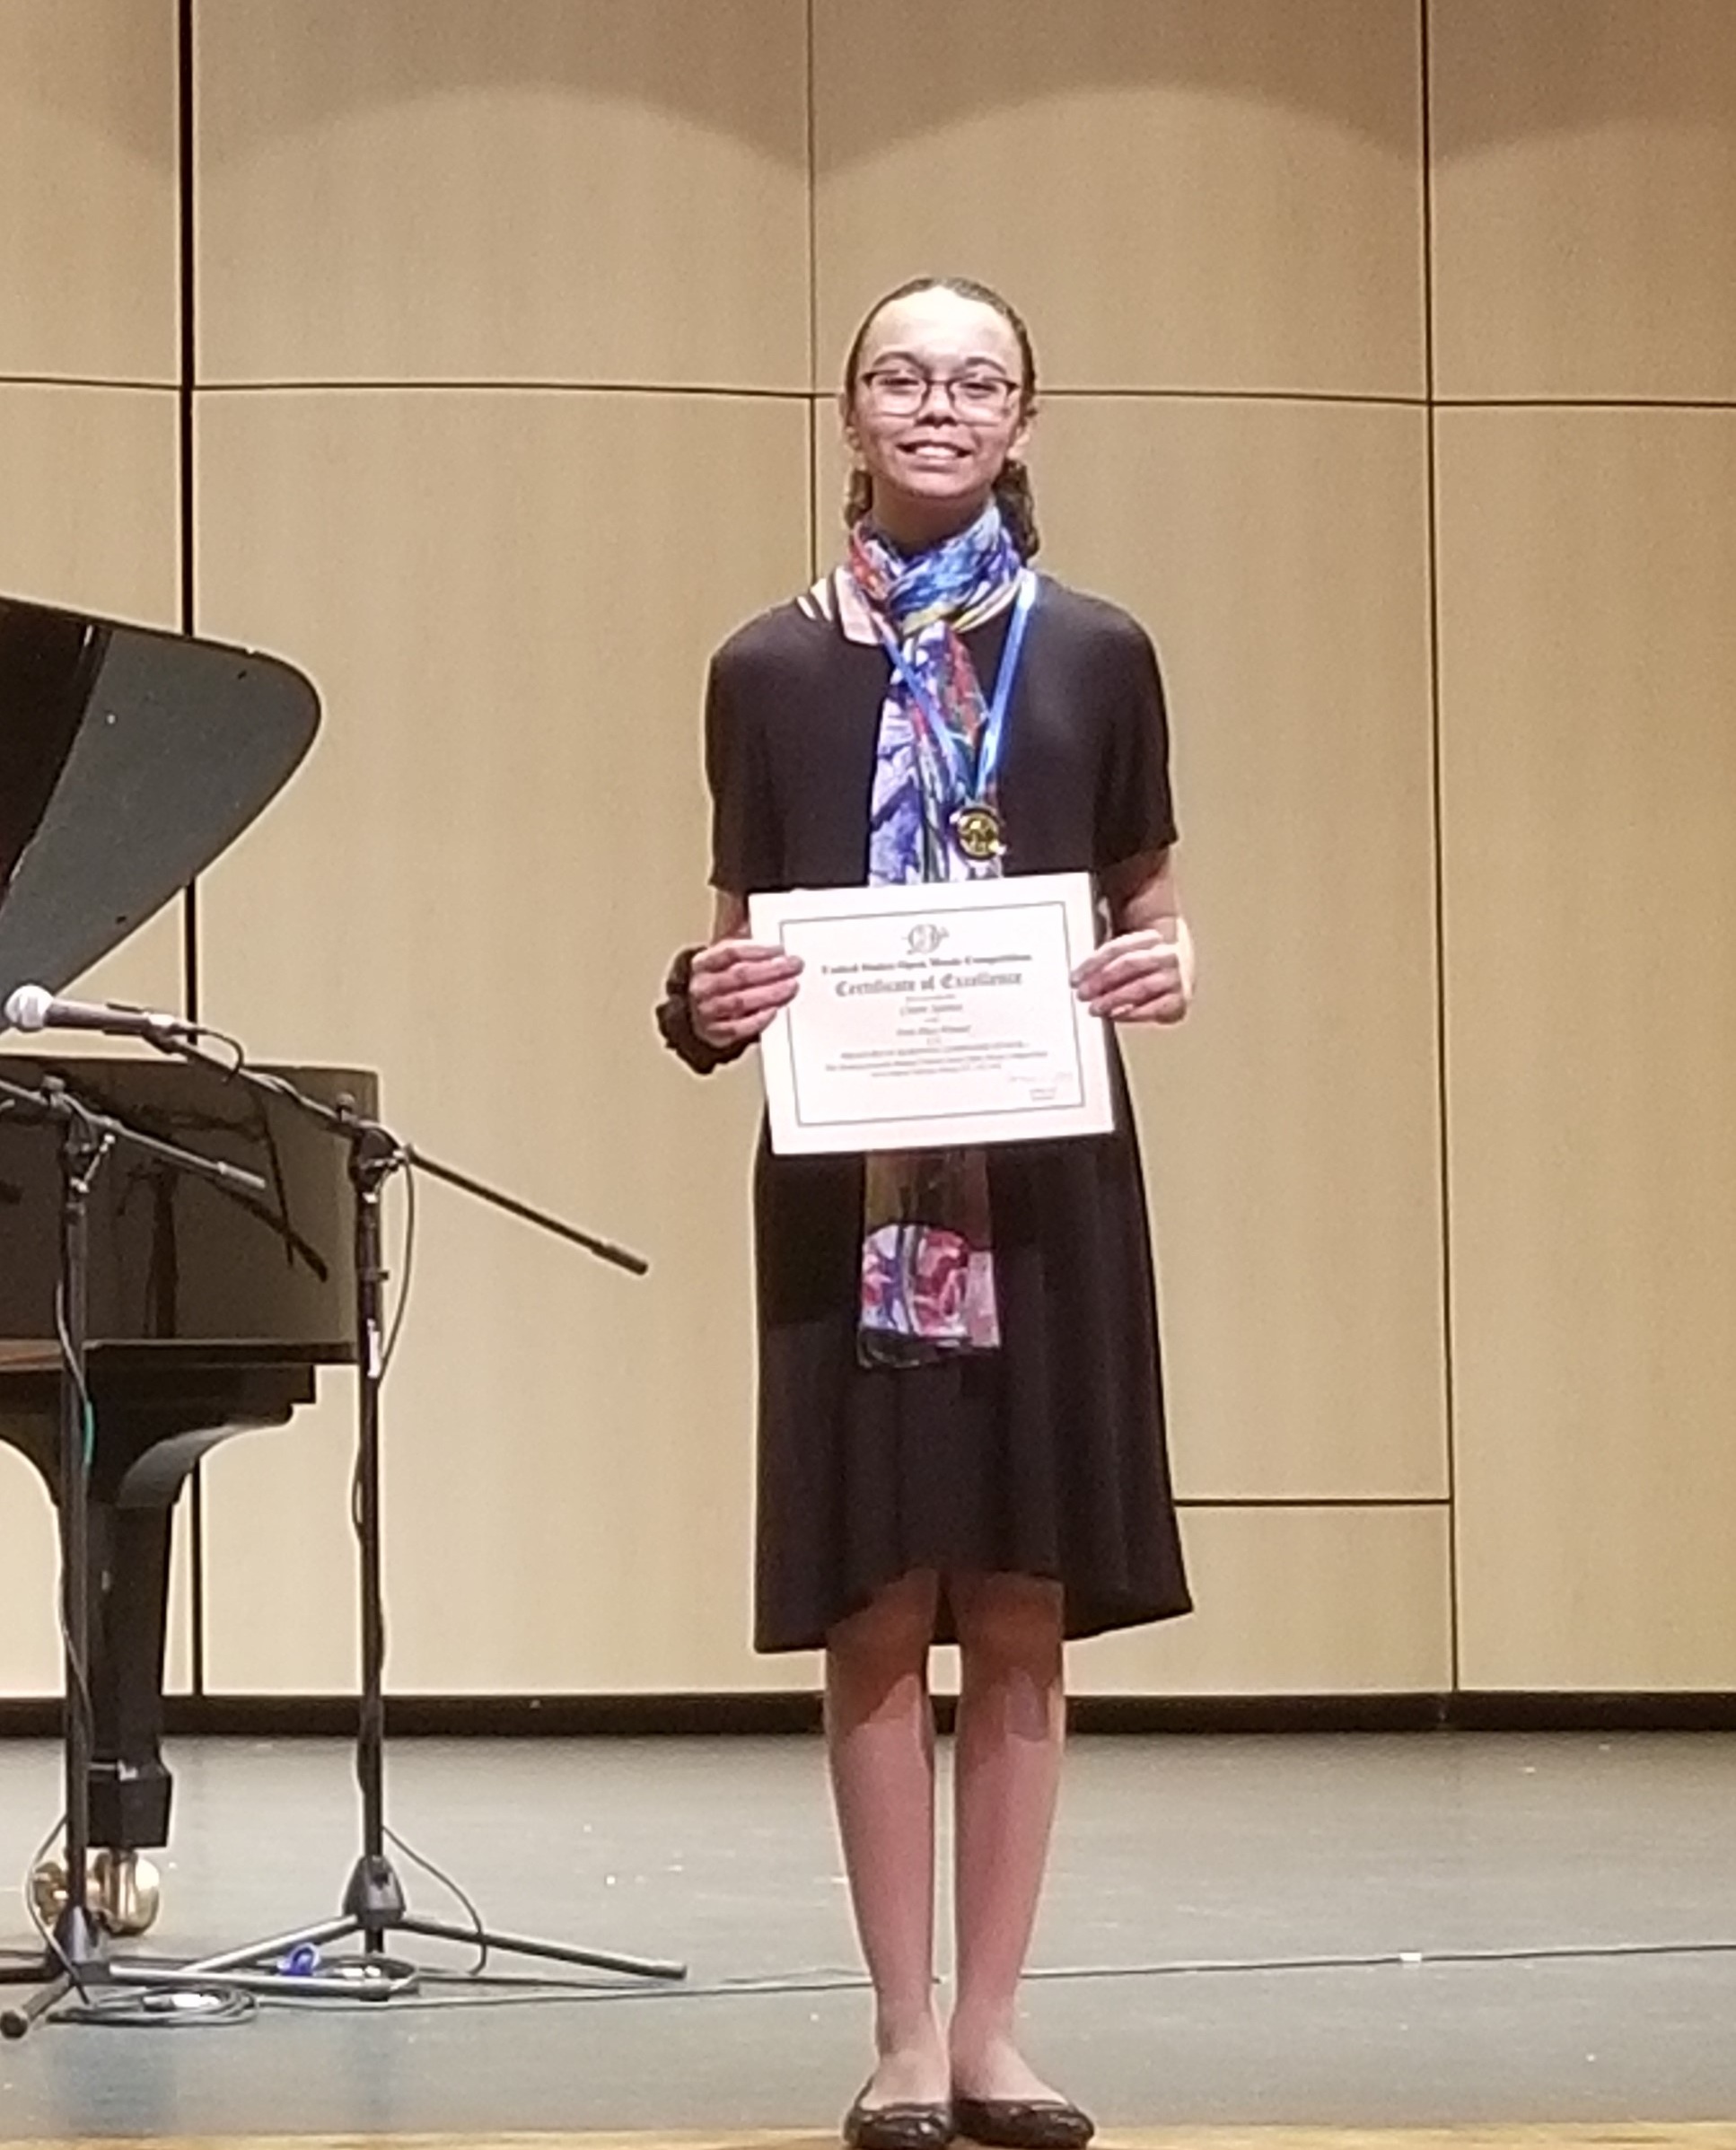 Claire S. at US Open Piano Competition